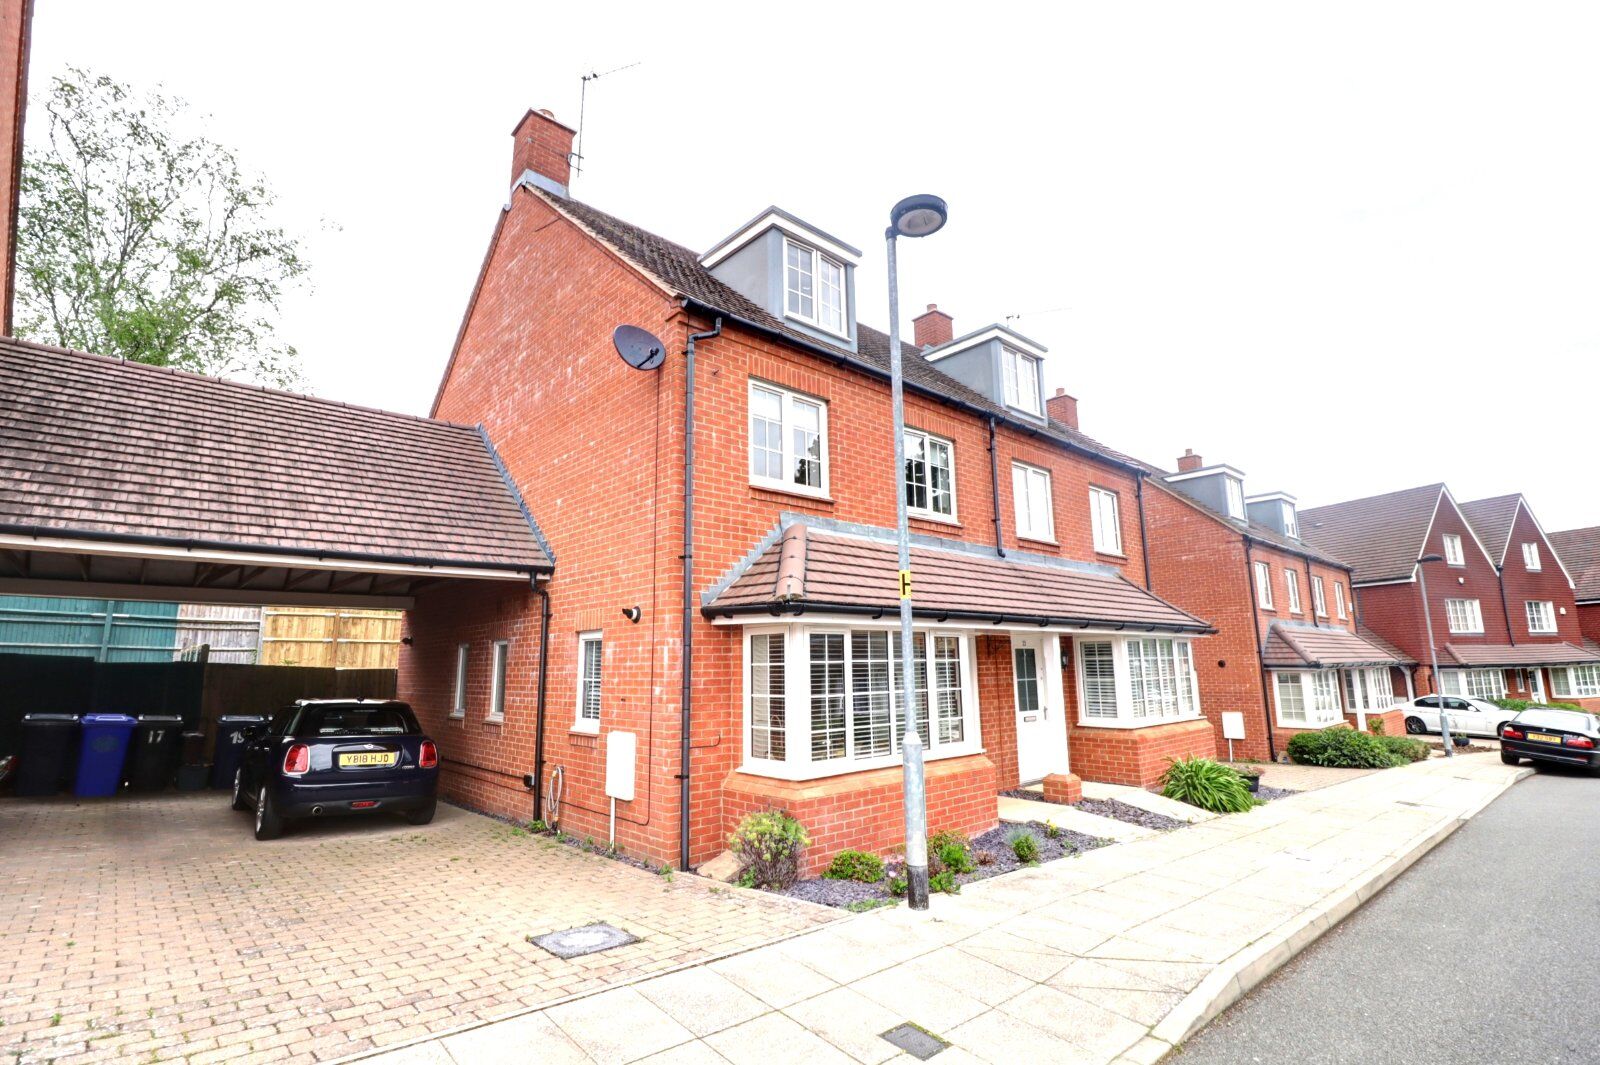 3 bedroom semi detached house to rent, Available unfurnished from 20/08/2024 Clayton Road, High Wycombe, HP14, main image